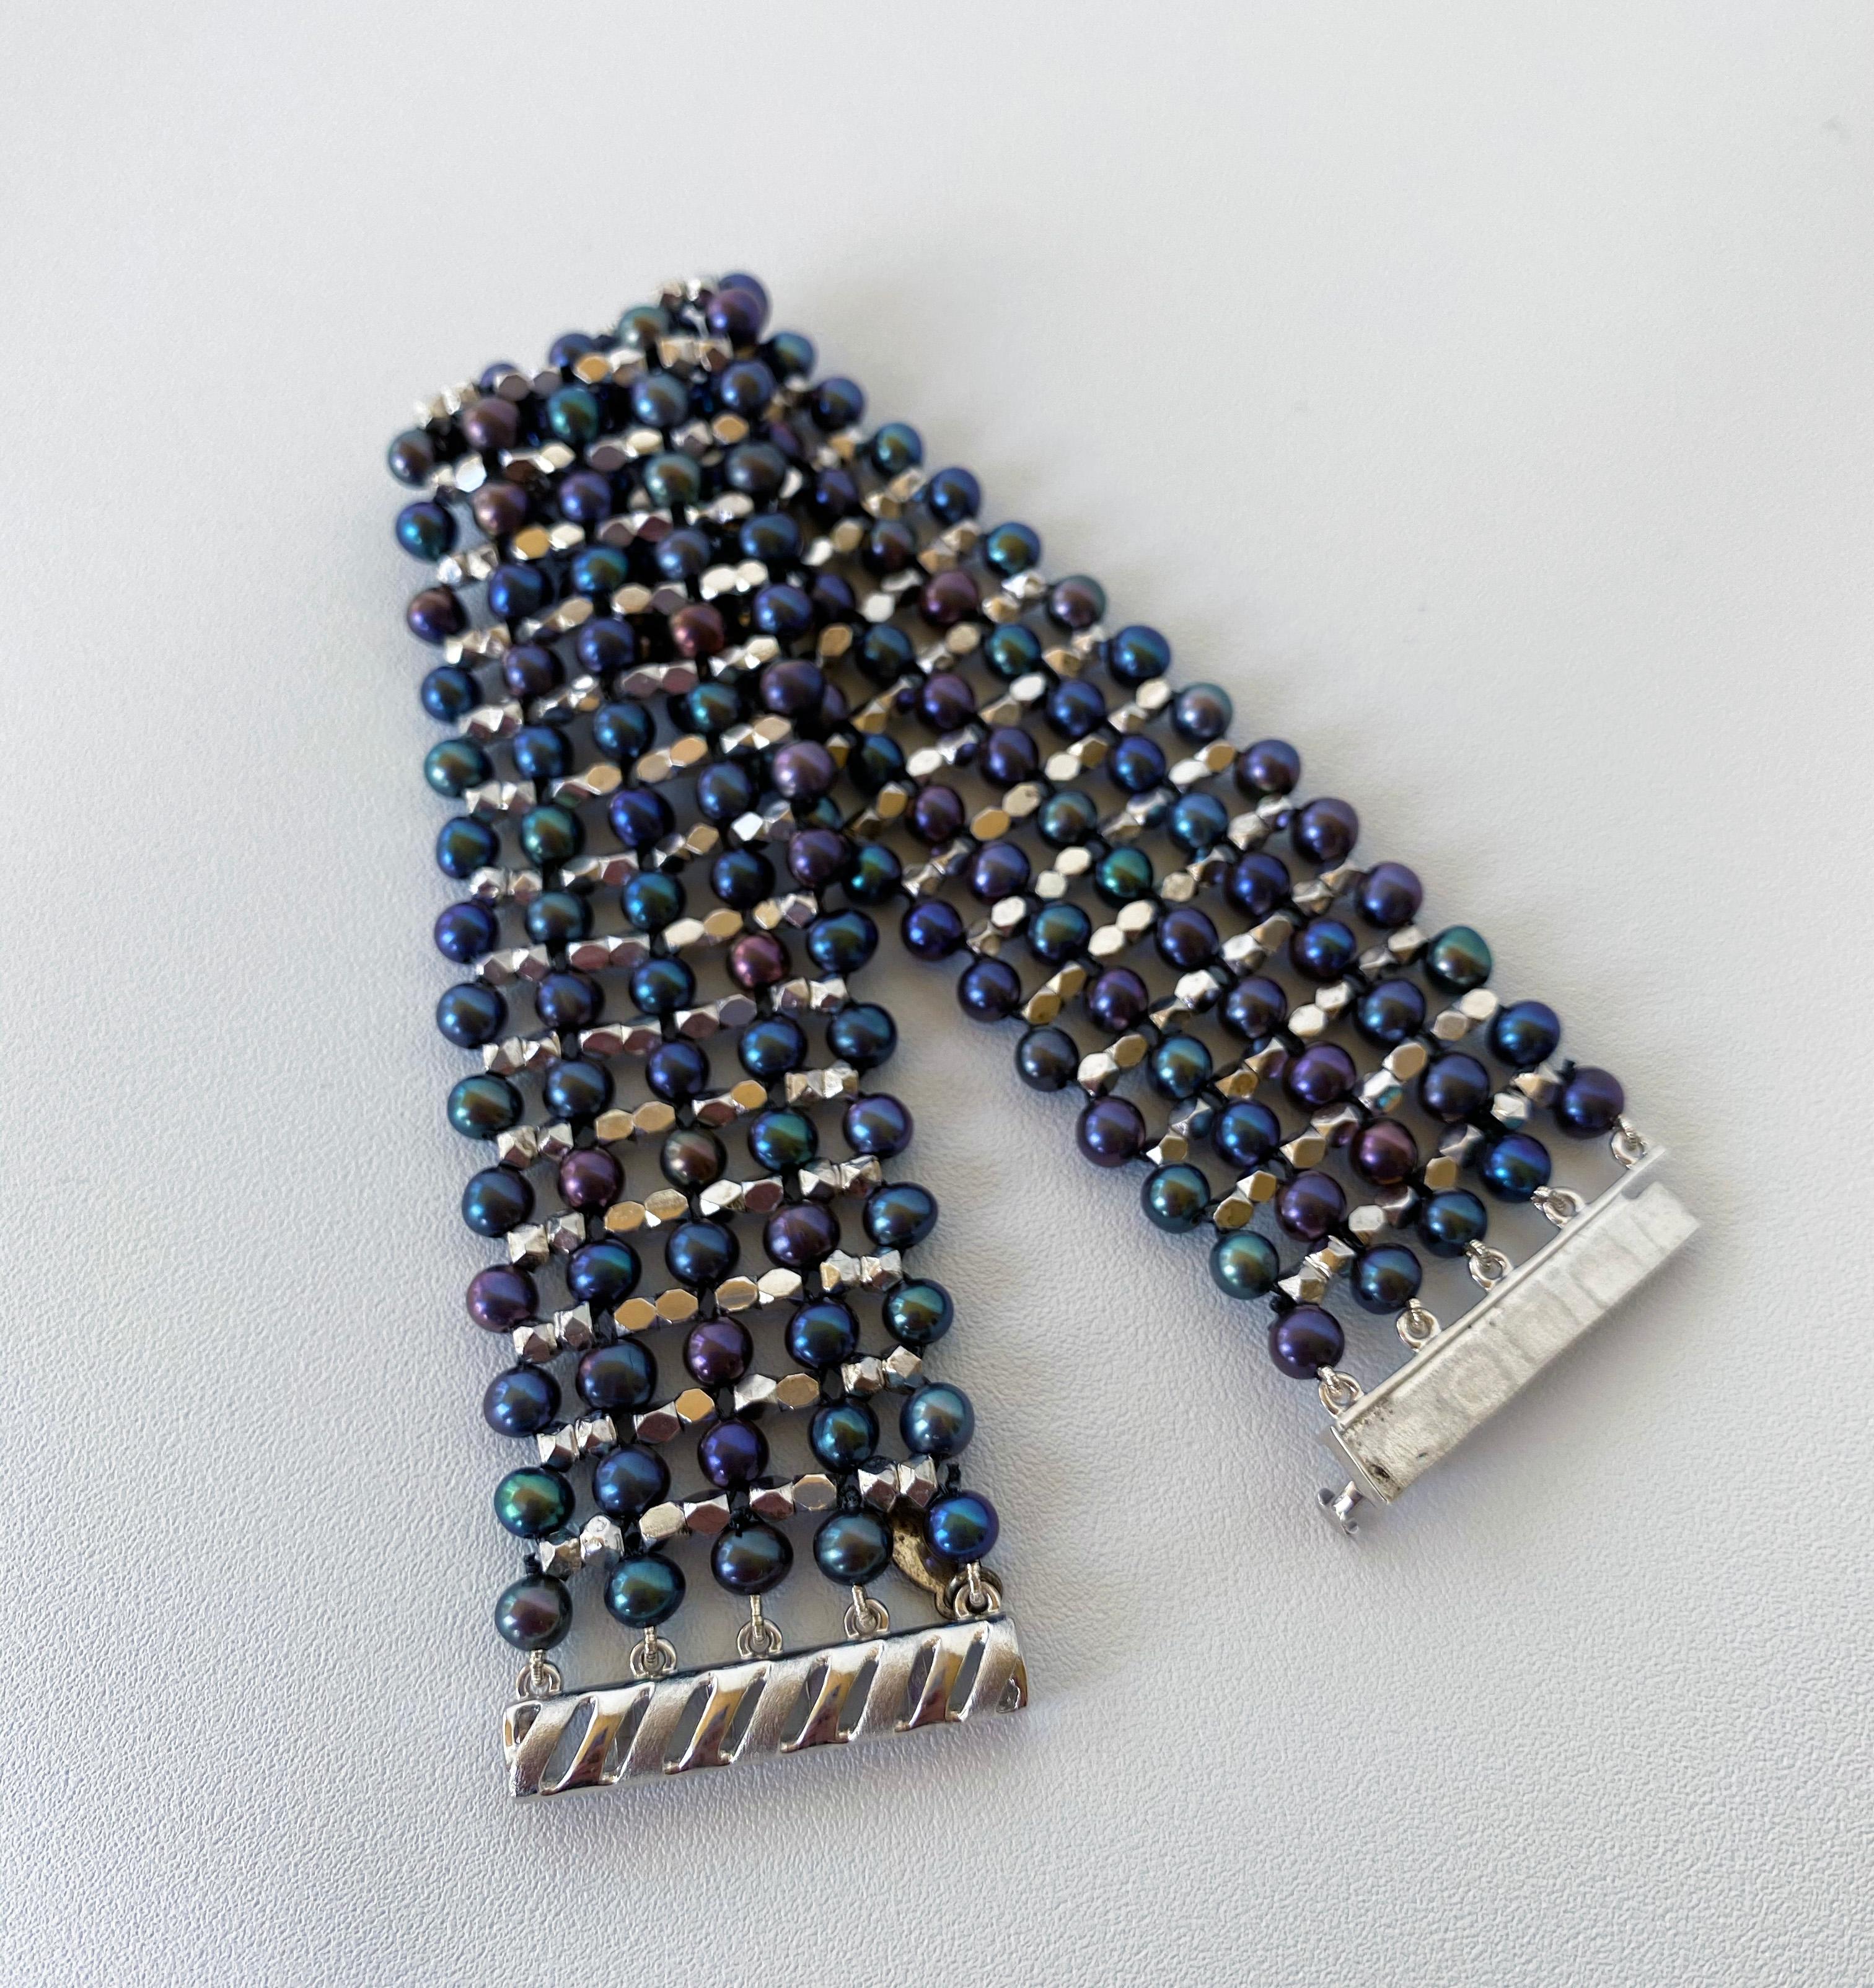 This black pearl, rhodium-plated, sterling silver, beaded, cuff bracelet is intricately handwoven by Marina J. Woven through the black pearls are rhodium plated sterling silver beads giving the bracelet dimension. The rhodium plating maintains the